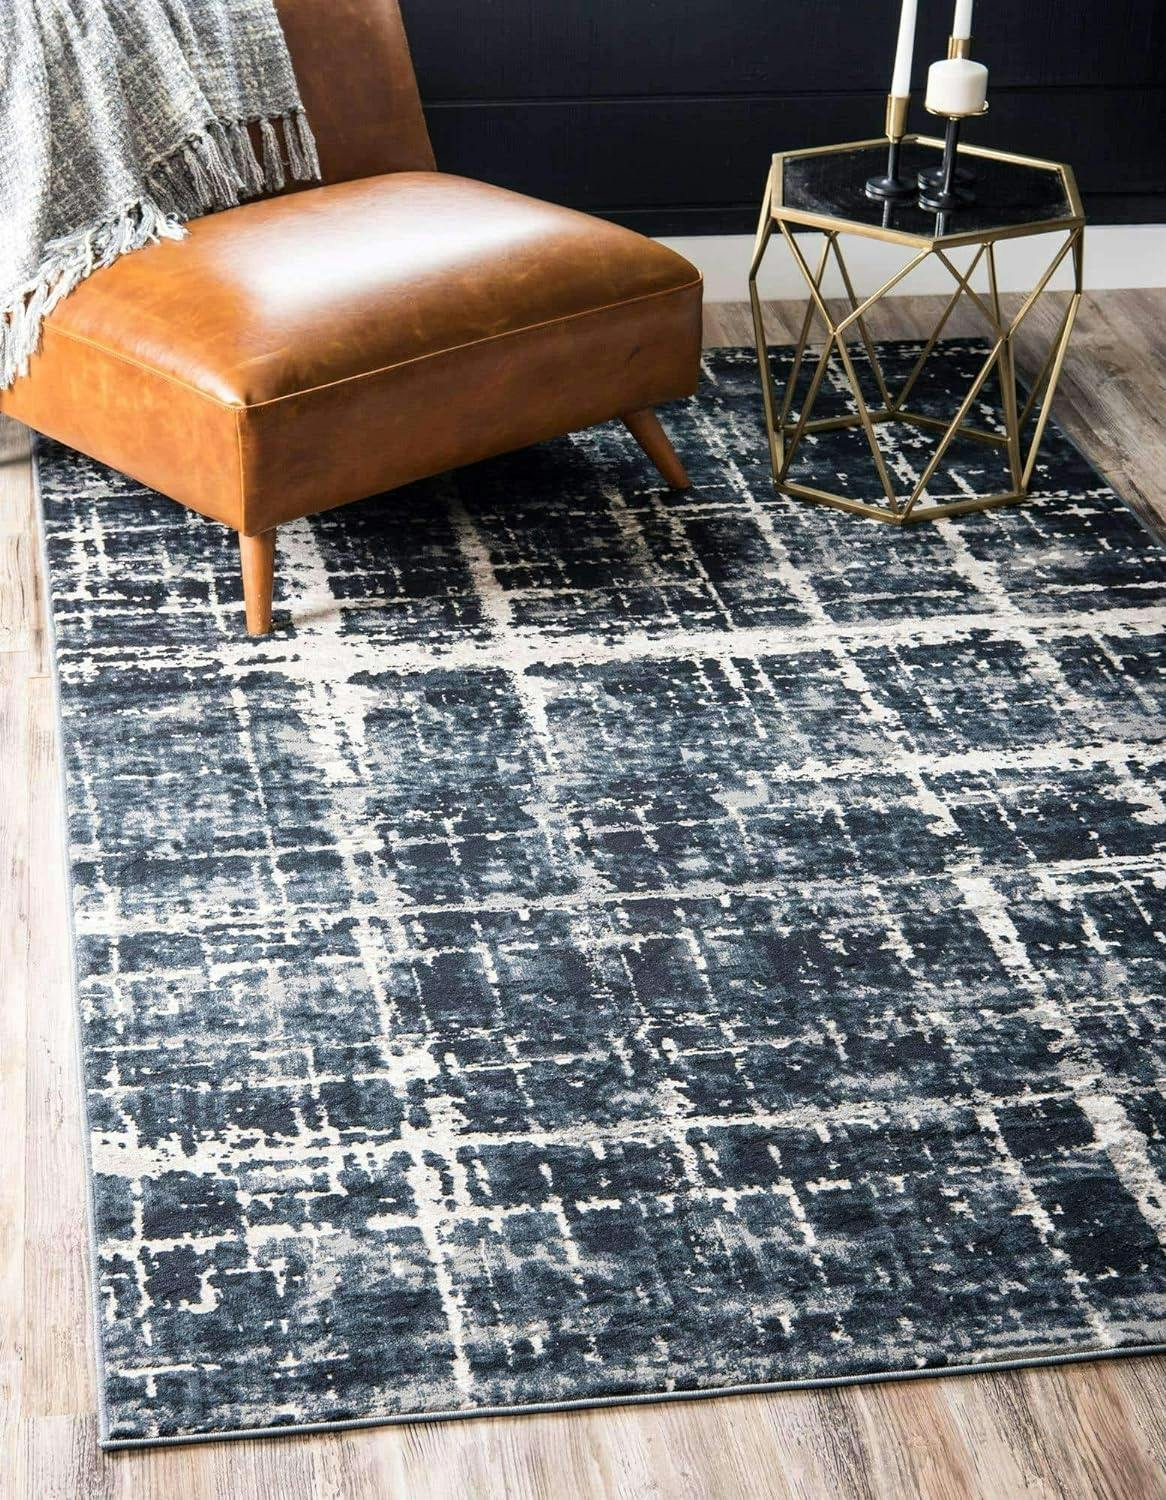 Navy Blue Rectangular Easy-Care Synthetic 8' x 10' Rug